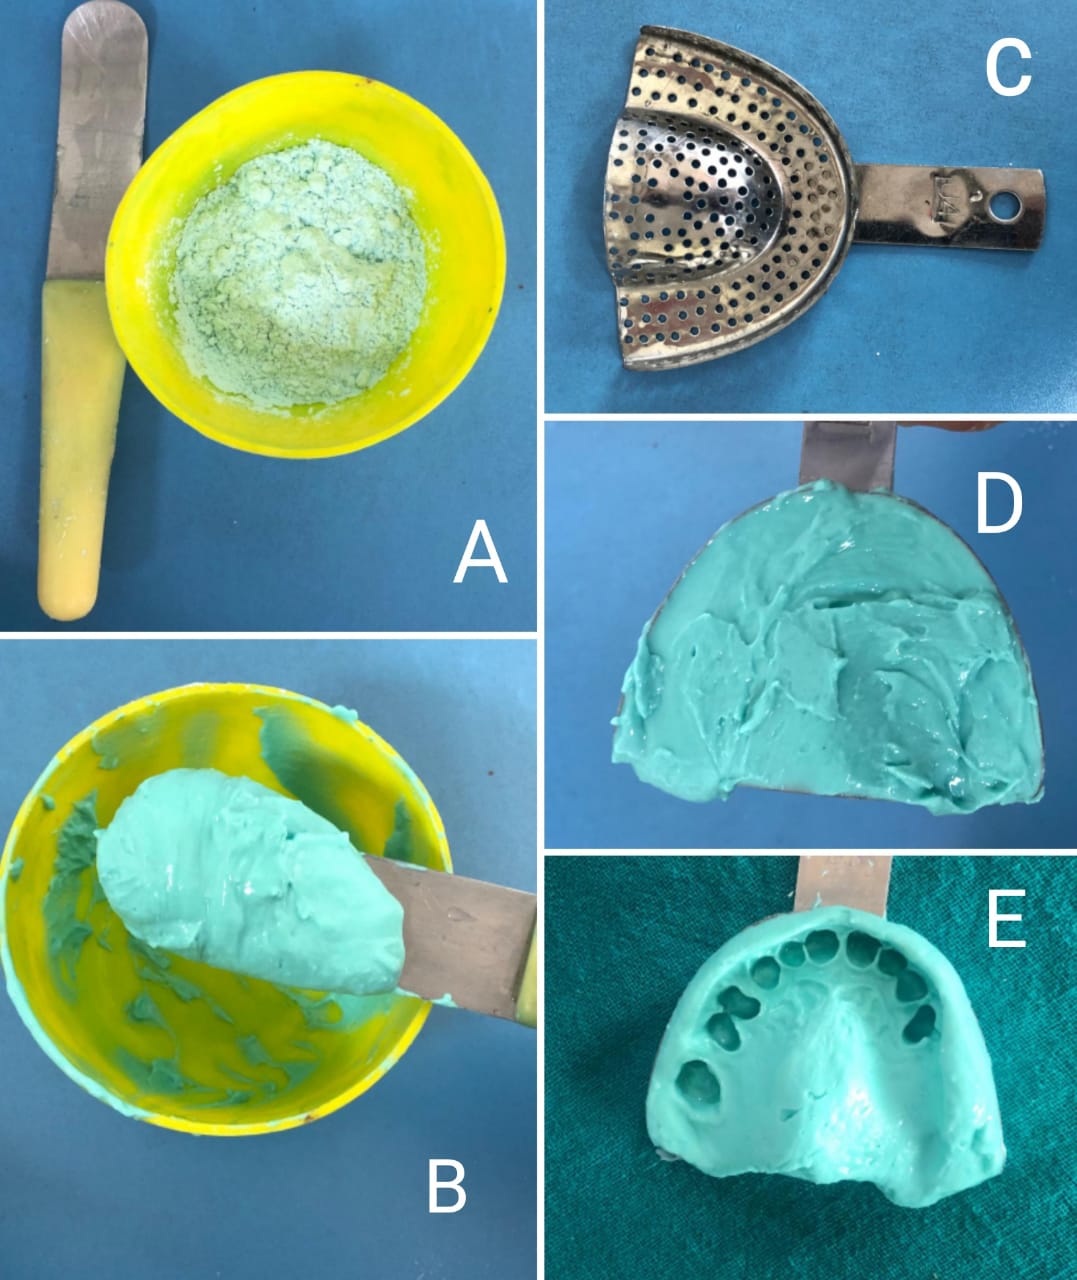 Fig3-  Mixing of alginate for impression making
A) Measured amount of alginate powder in a flexible rubber bowl and a curved